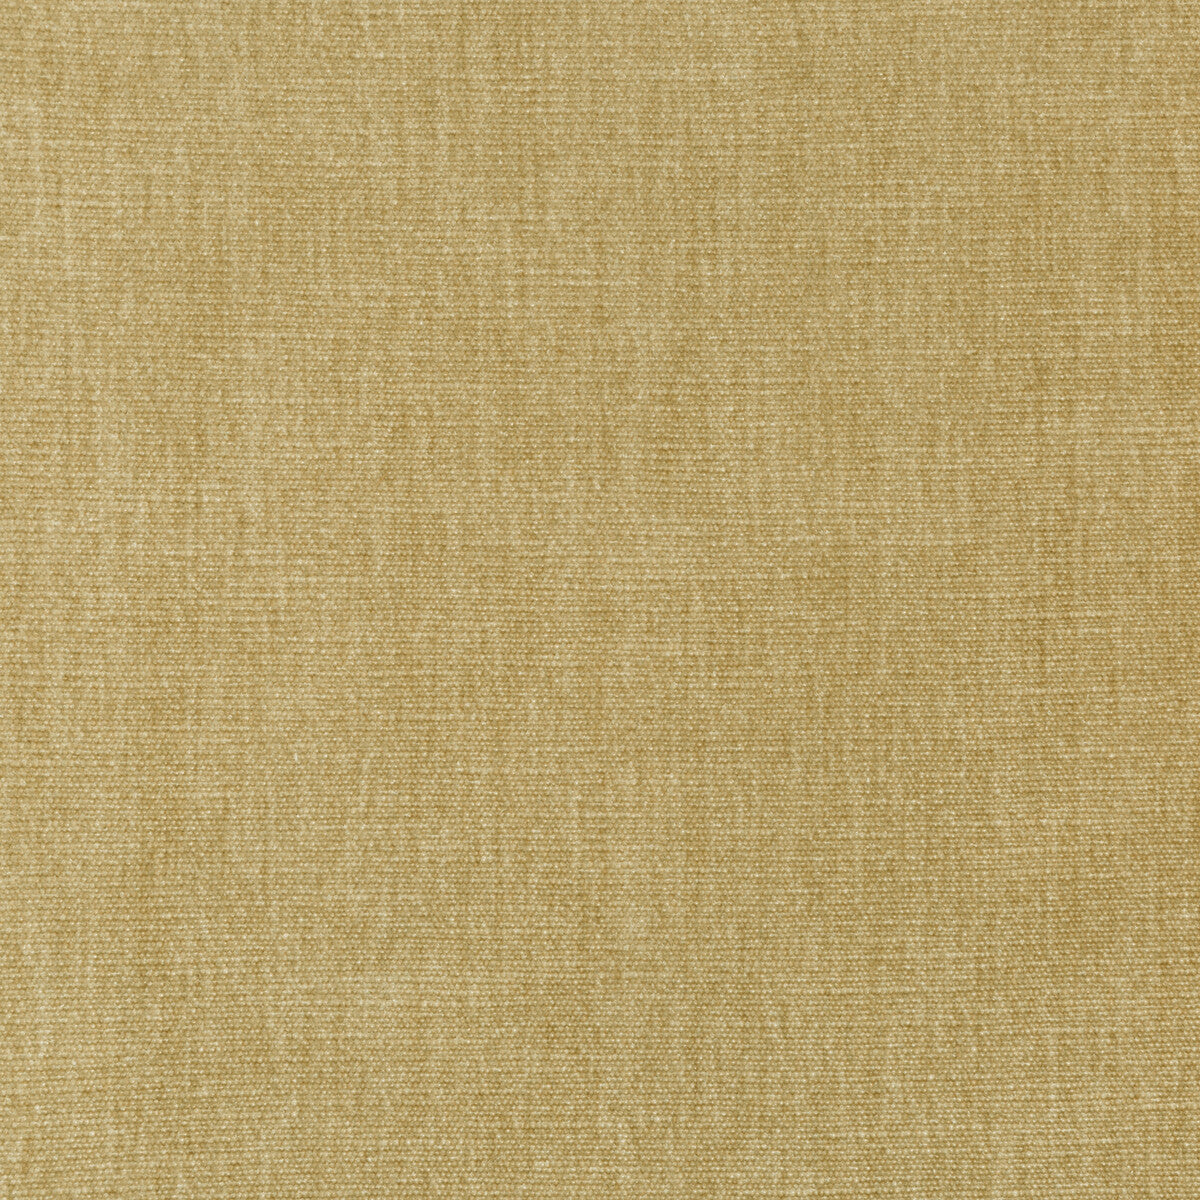 Kravet Smart fabric in 36076-16 color - pattern 36076.16.0 - by Kravet Smart in the Sumptuous Chenille II collection